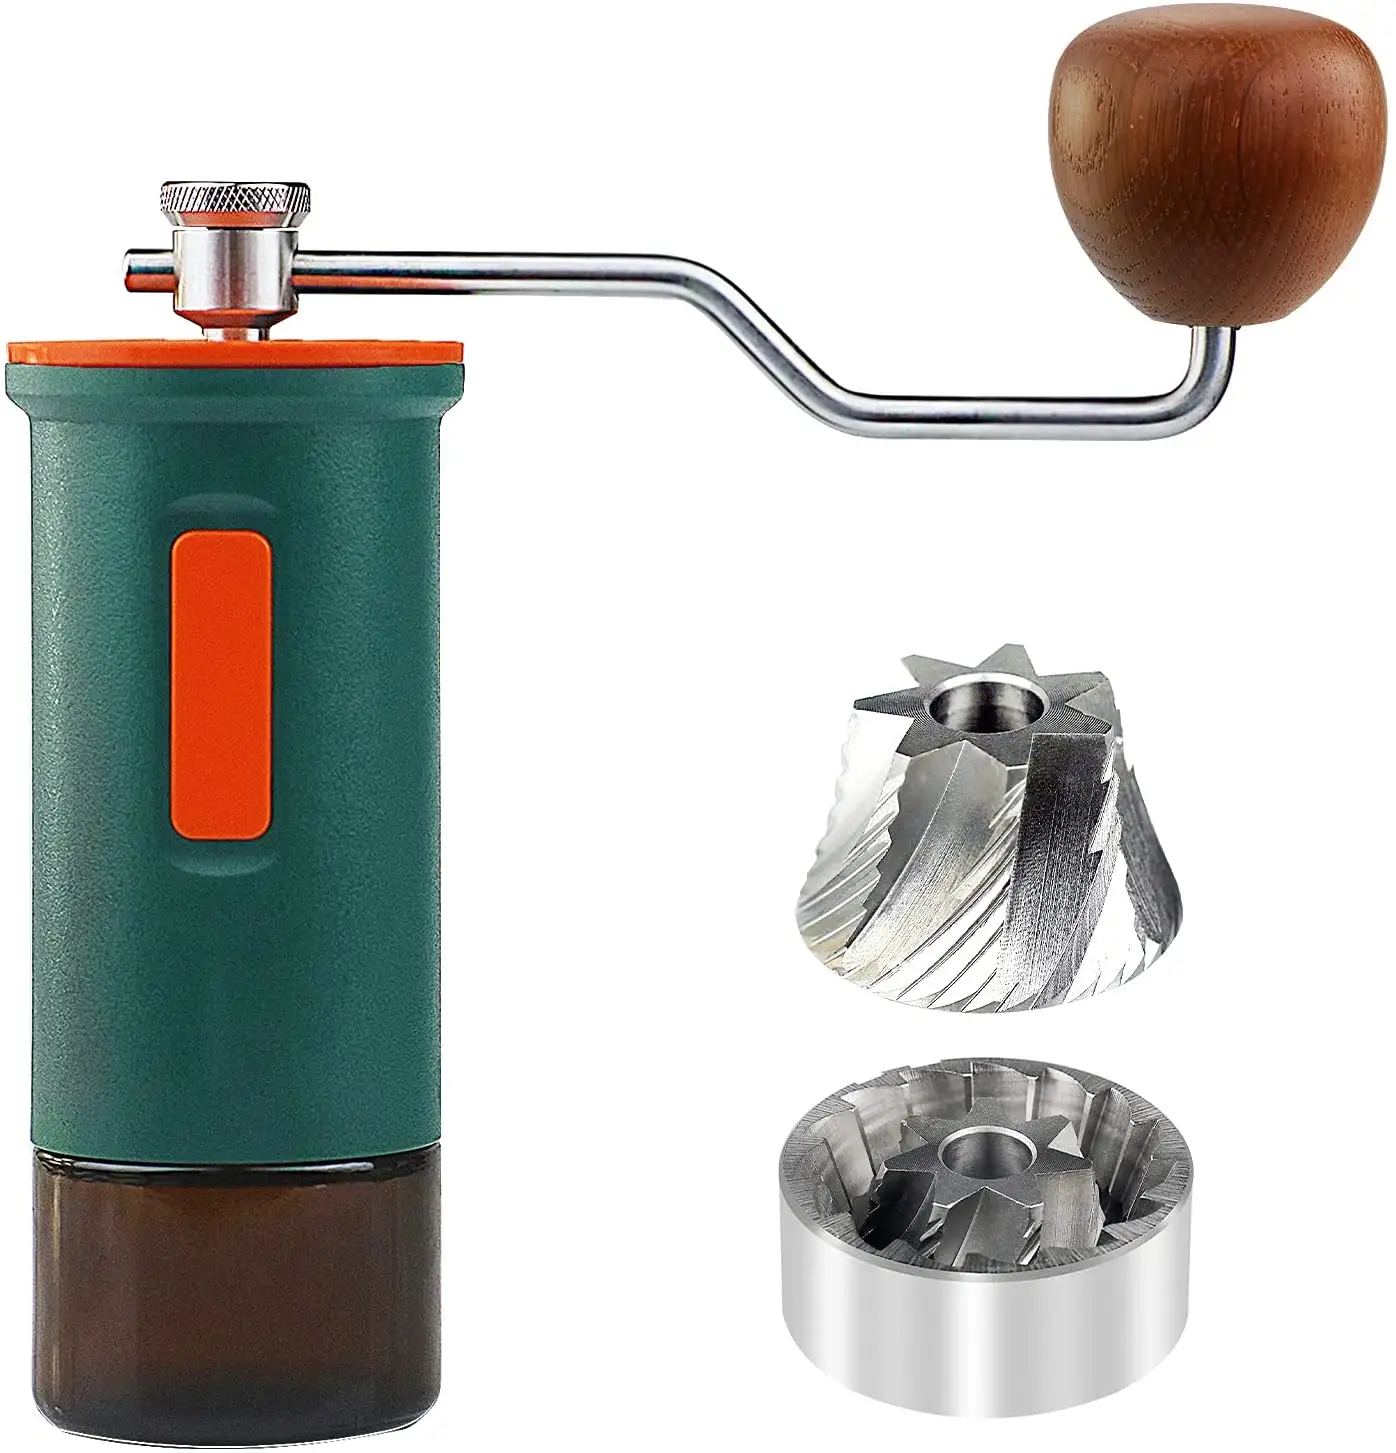 Amazon hot selling home accessories coffee grinder Adjustment Portable Manual Coffee Grinders